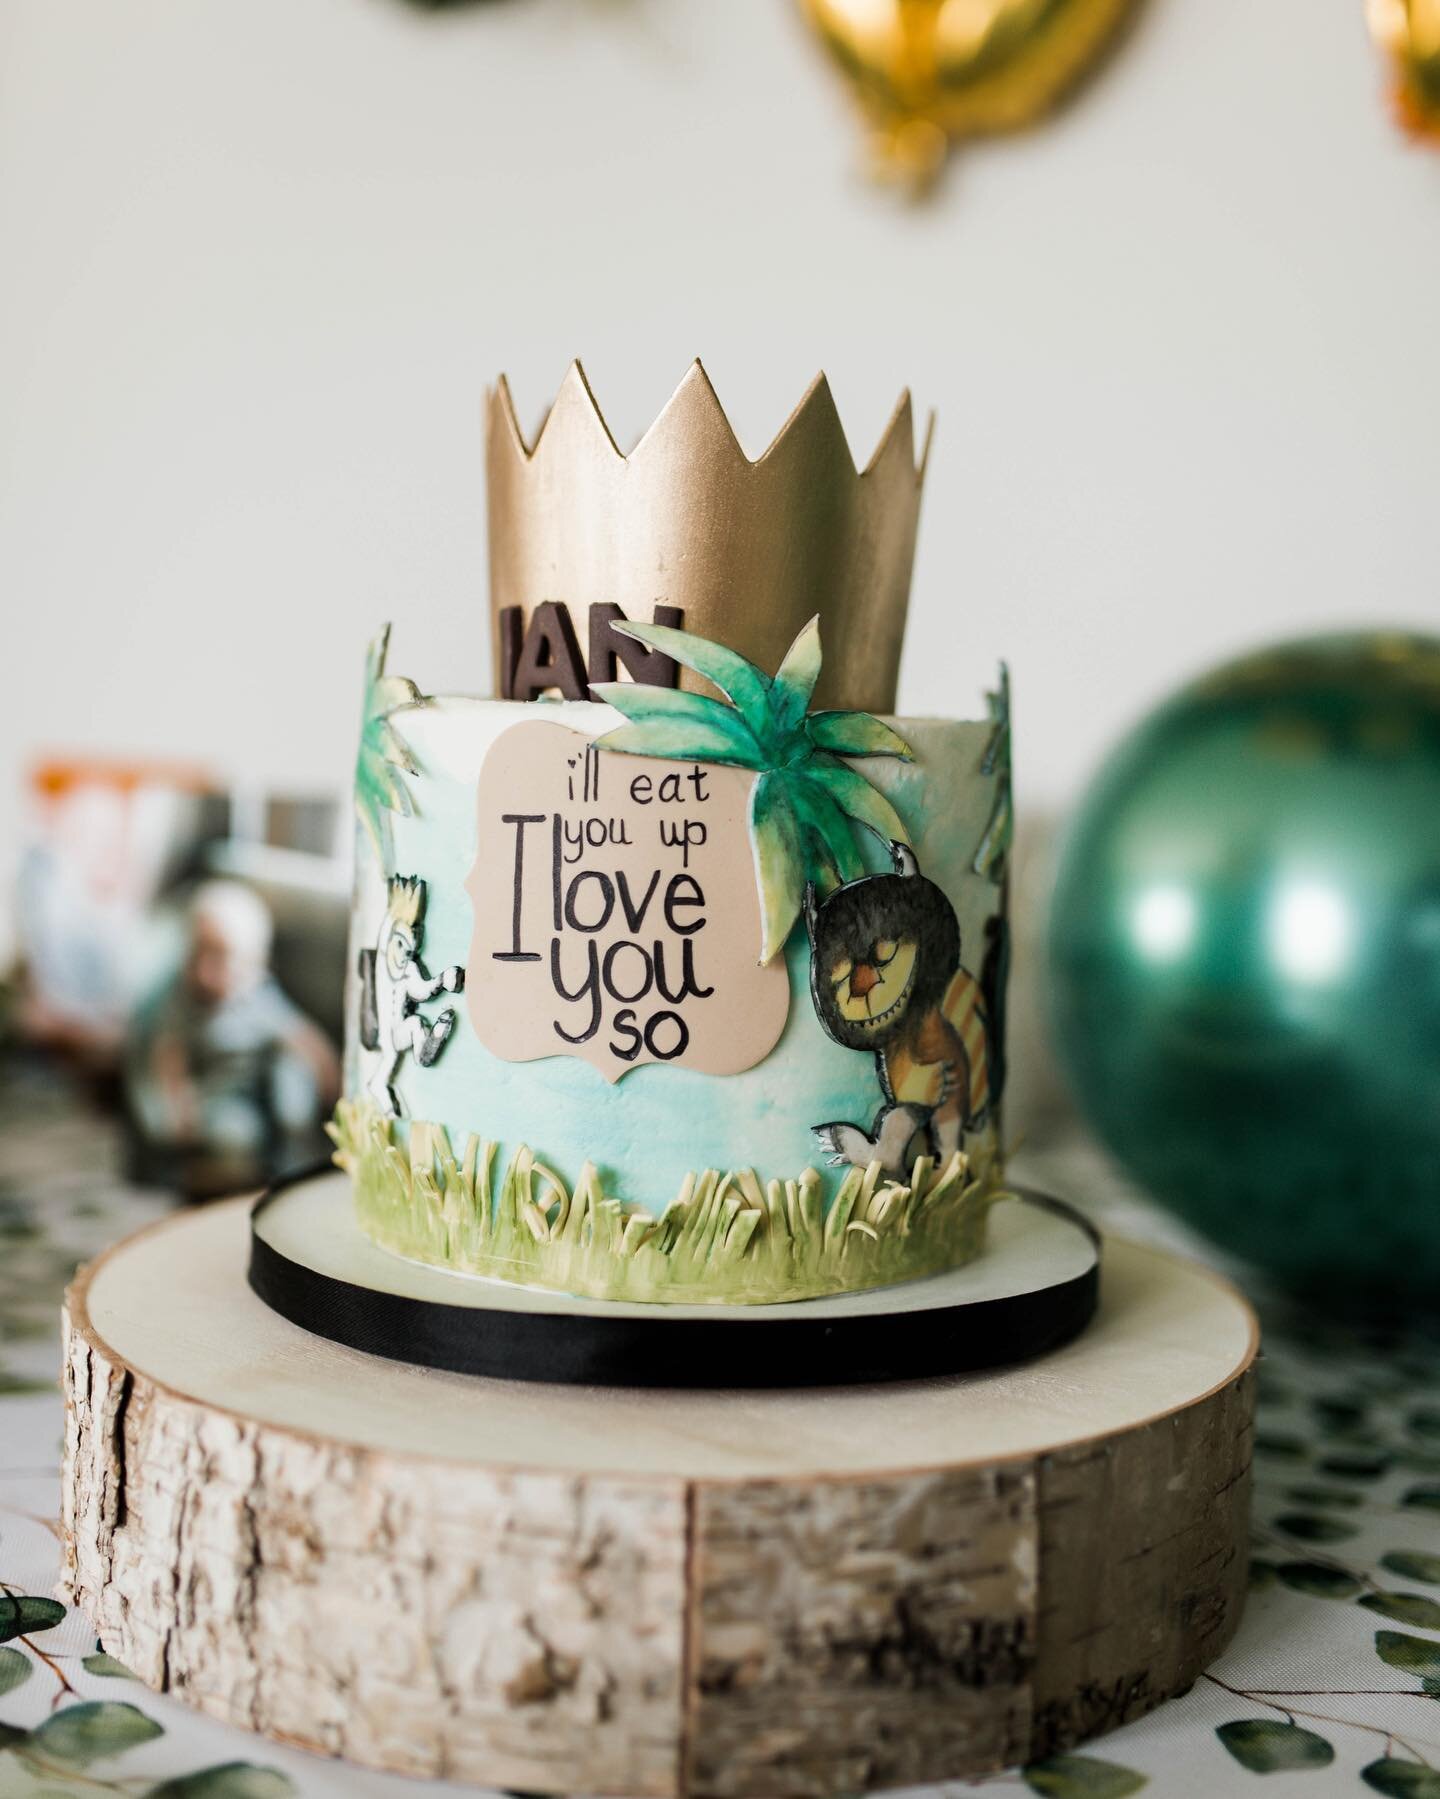 Becoming a favorite birthday theme of mine! So much creative potential and the colors are so pretty!

beautiful photo by @photobysheenarae 

#firstbirthday #wherethewildthingsare #eatyouup #kansascitybirthday #kccakes